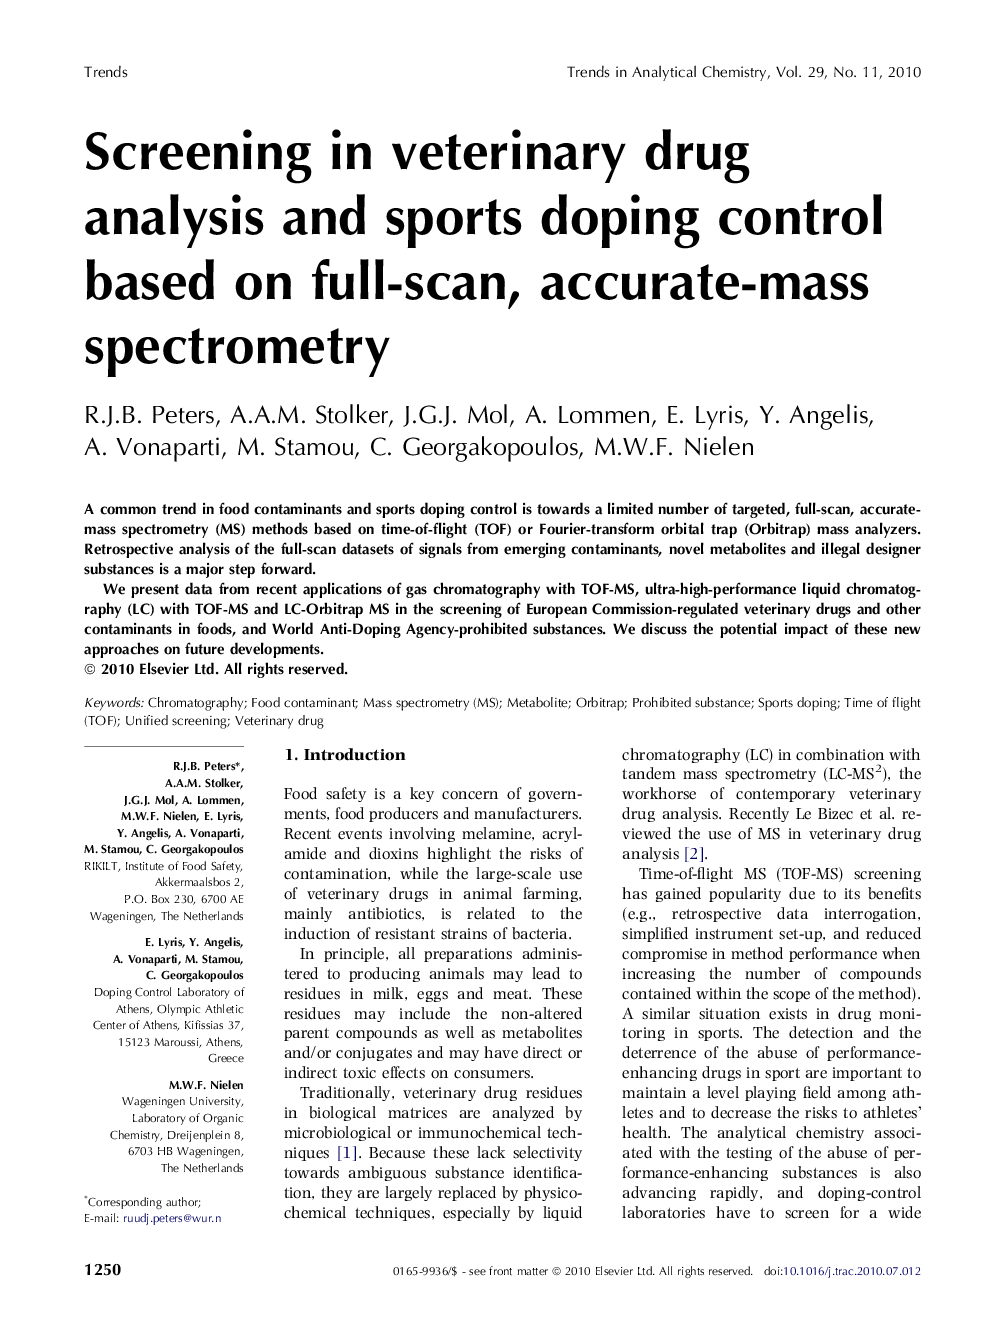 Screening in veterinary drug analysis and sports doping control based on full-scan, accurate-mass spectrometry